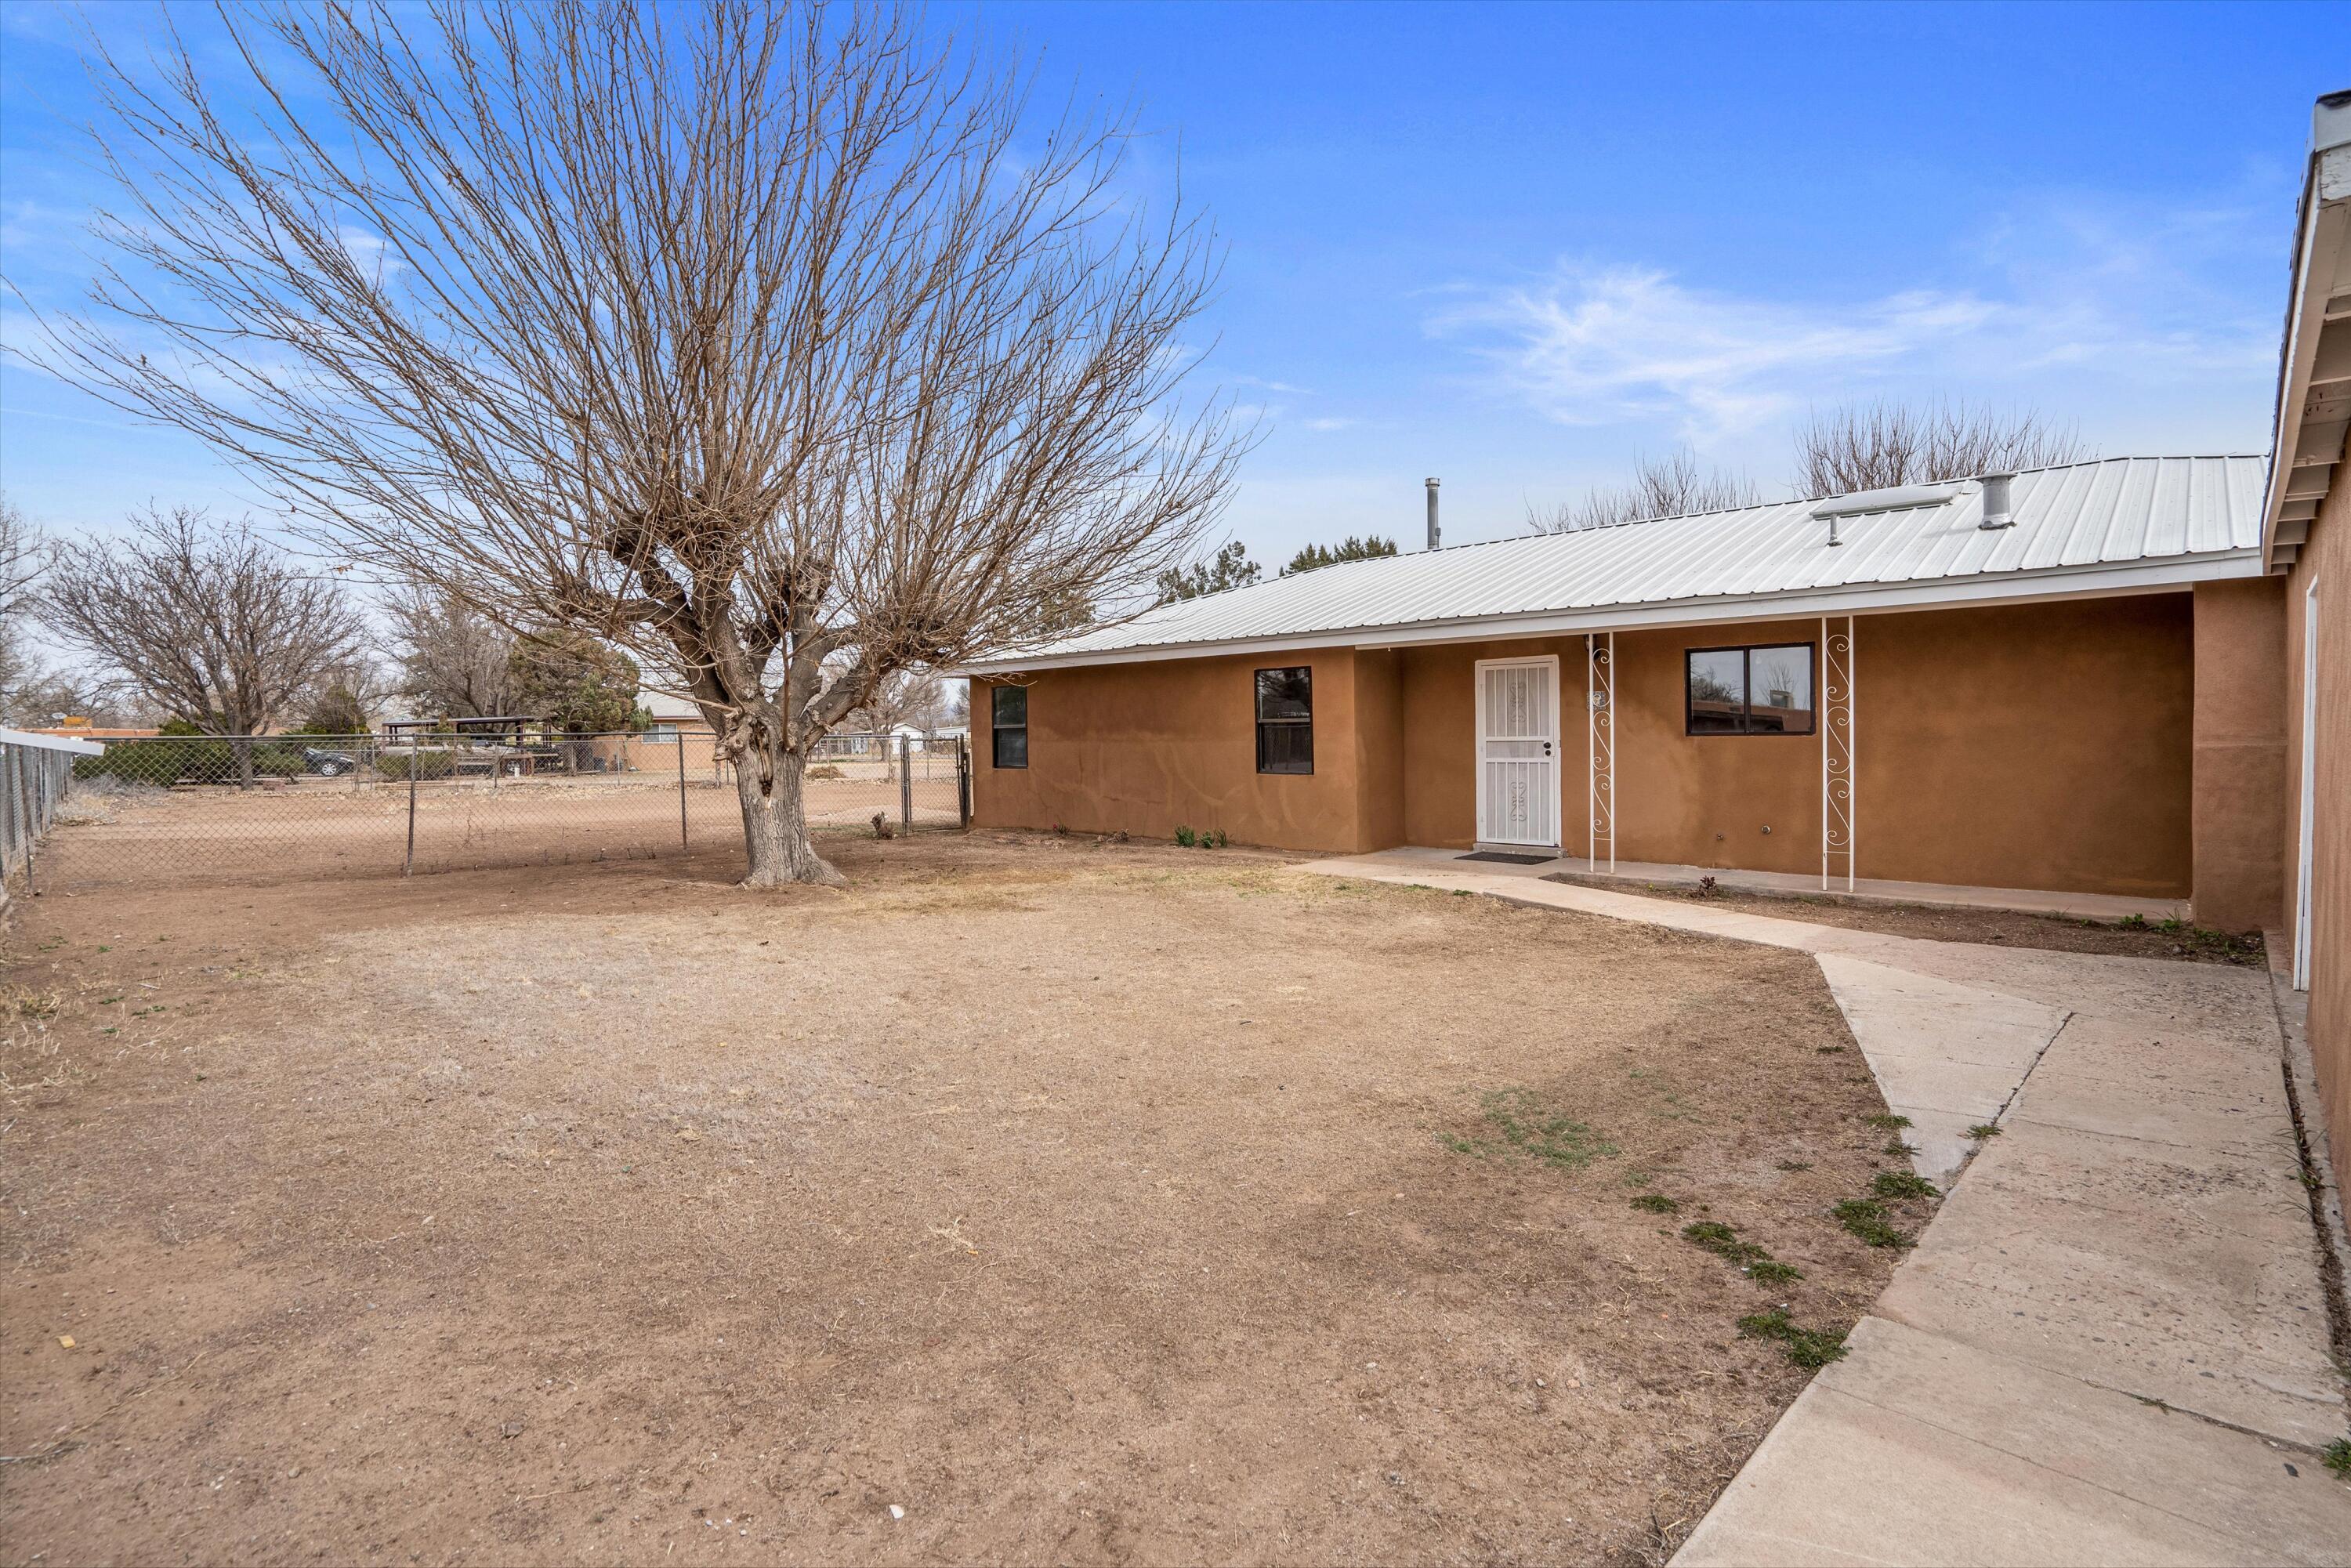 4 Terry Drive, Los Lunas, New Mexico 87031, 4 Bedrooms Bedrooms, ,2 BathroomsBathrooms,Residential,For Sale,4 Terry Drive,1058399